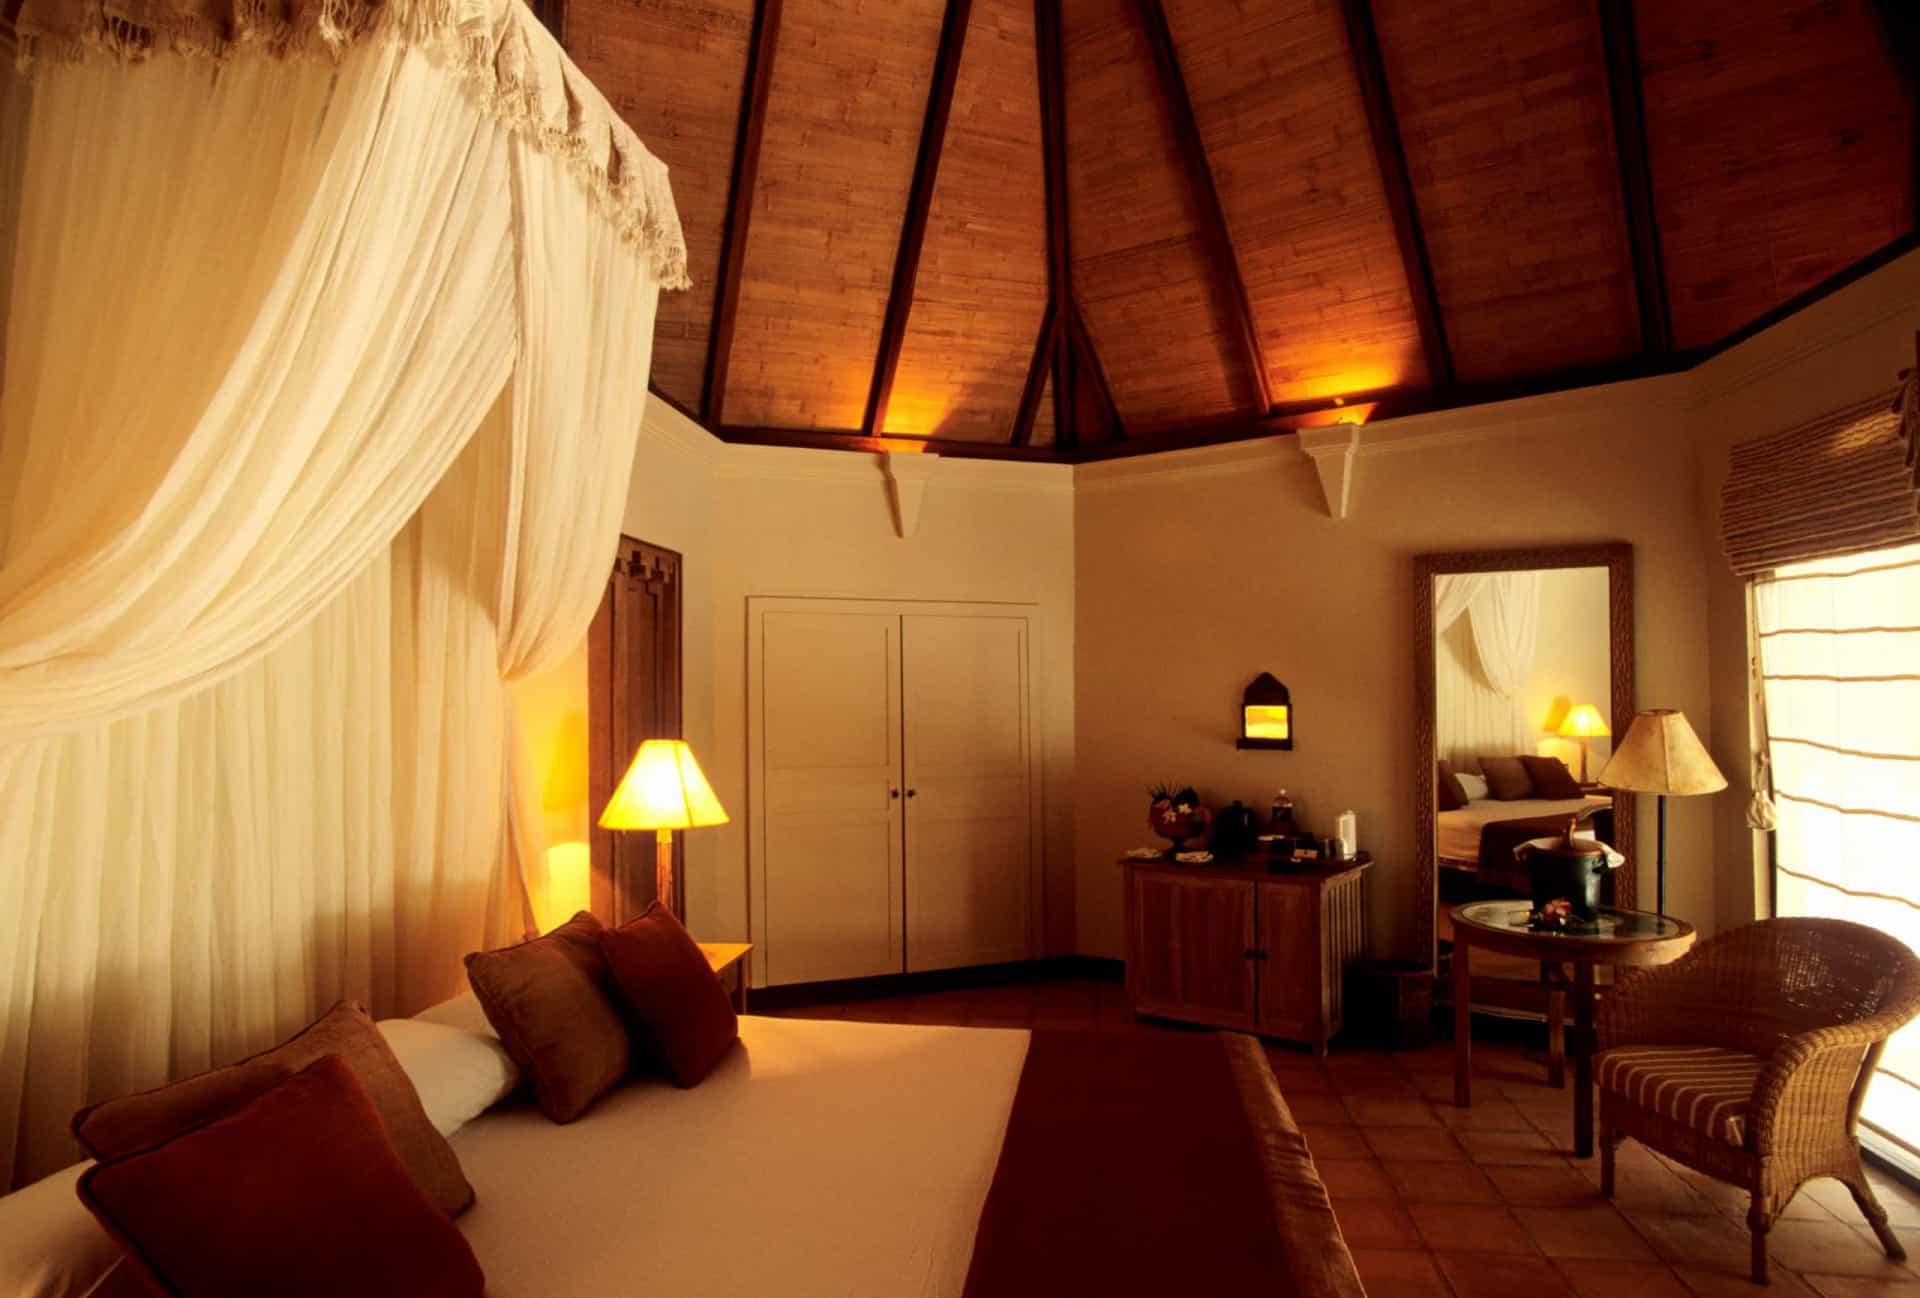 <p>Every resort has its own style, but generally the standard of design and <a href="https://www.starsinsider.com/travel/391566/overnight-sensations-the-worlds-most-desirable-hotels" rel="noopener">luxury</a> is very high. This room is from the Four Seasons Resort on Kuda Huraa. It costs around US$800 per night.</p>